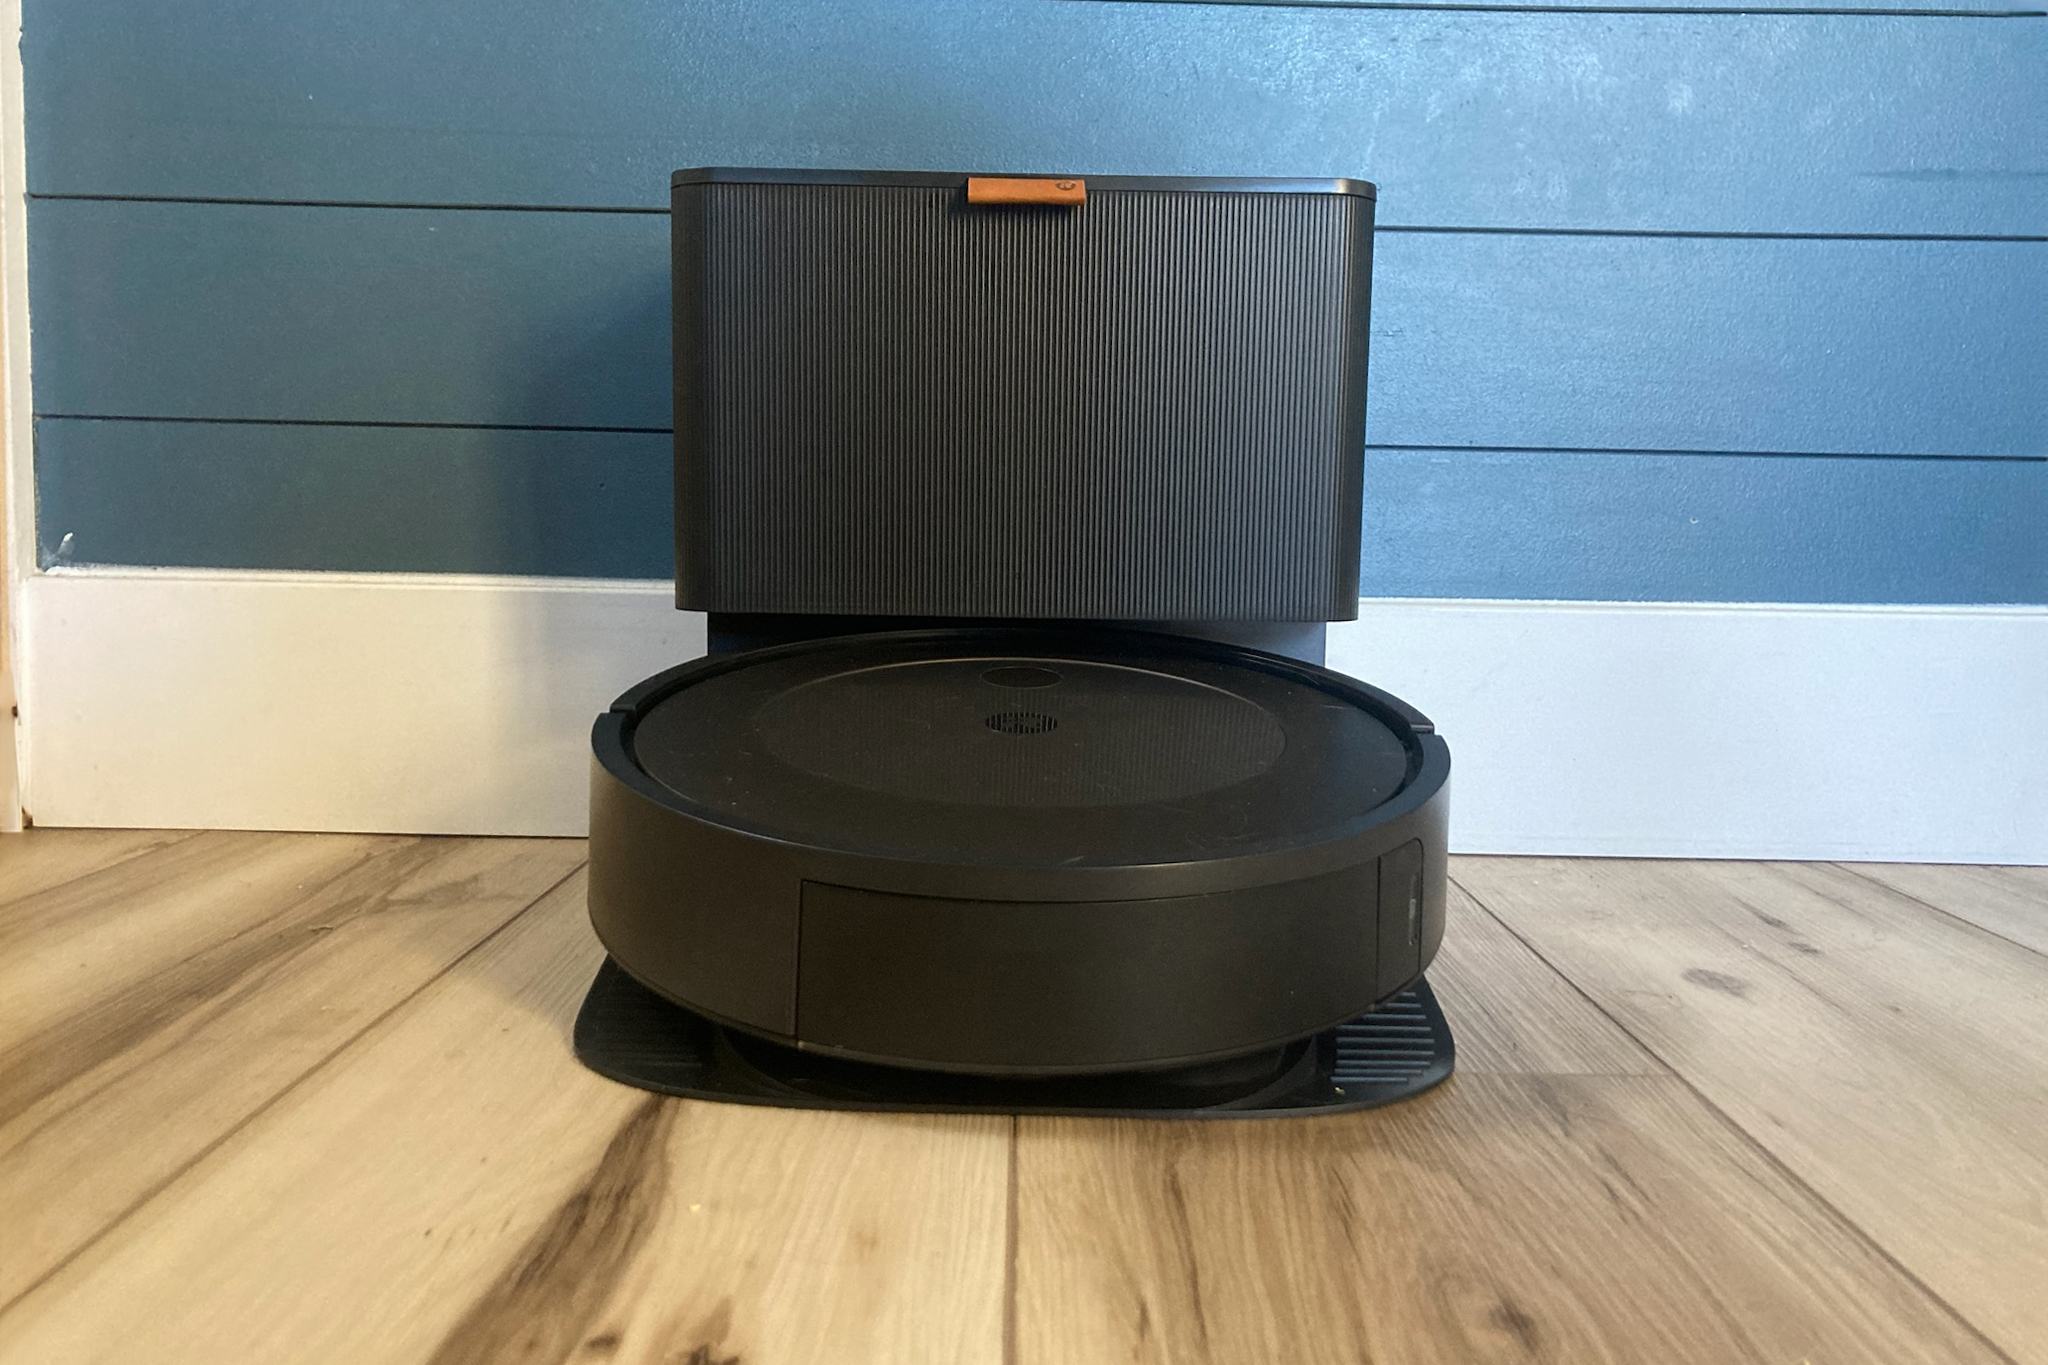 The 3 Best Robot Vacuums of 2024